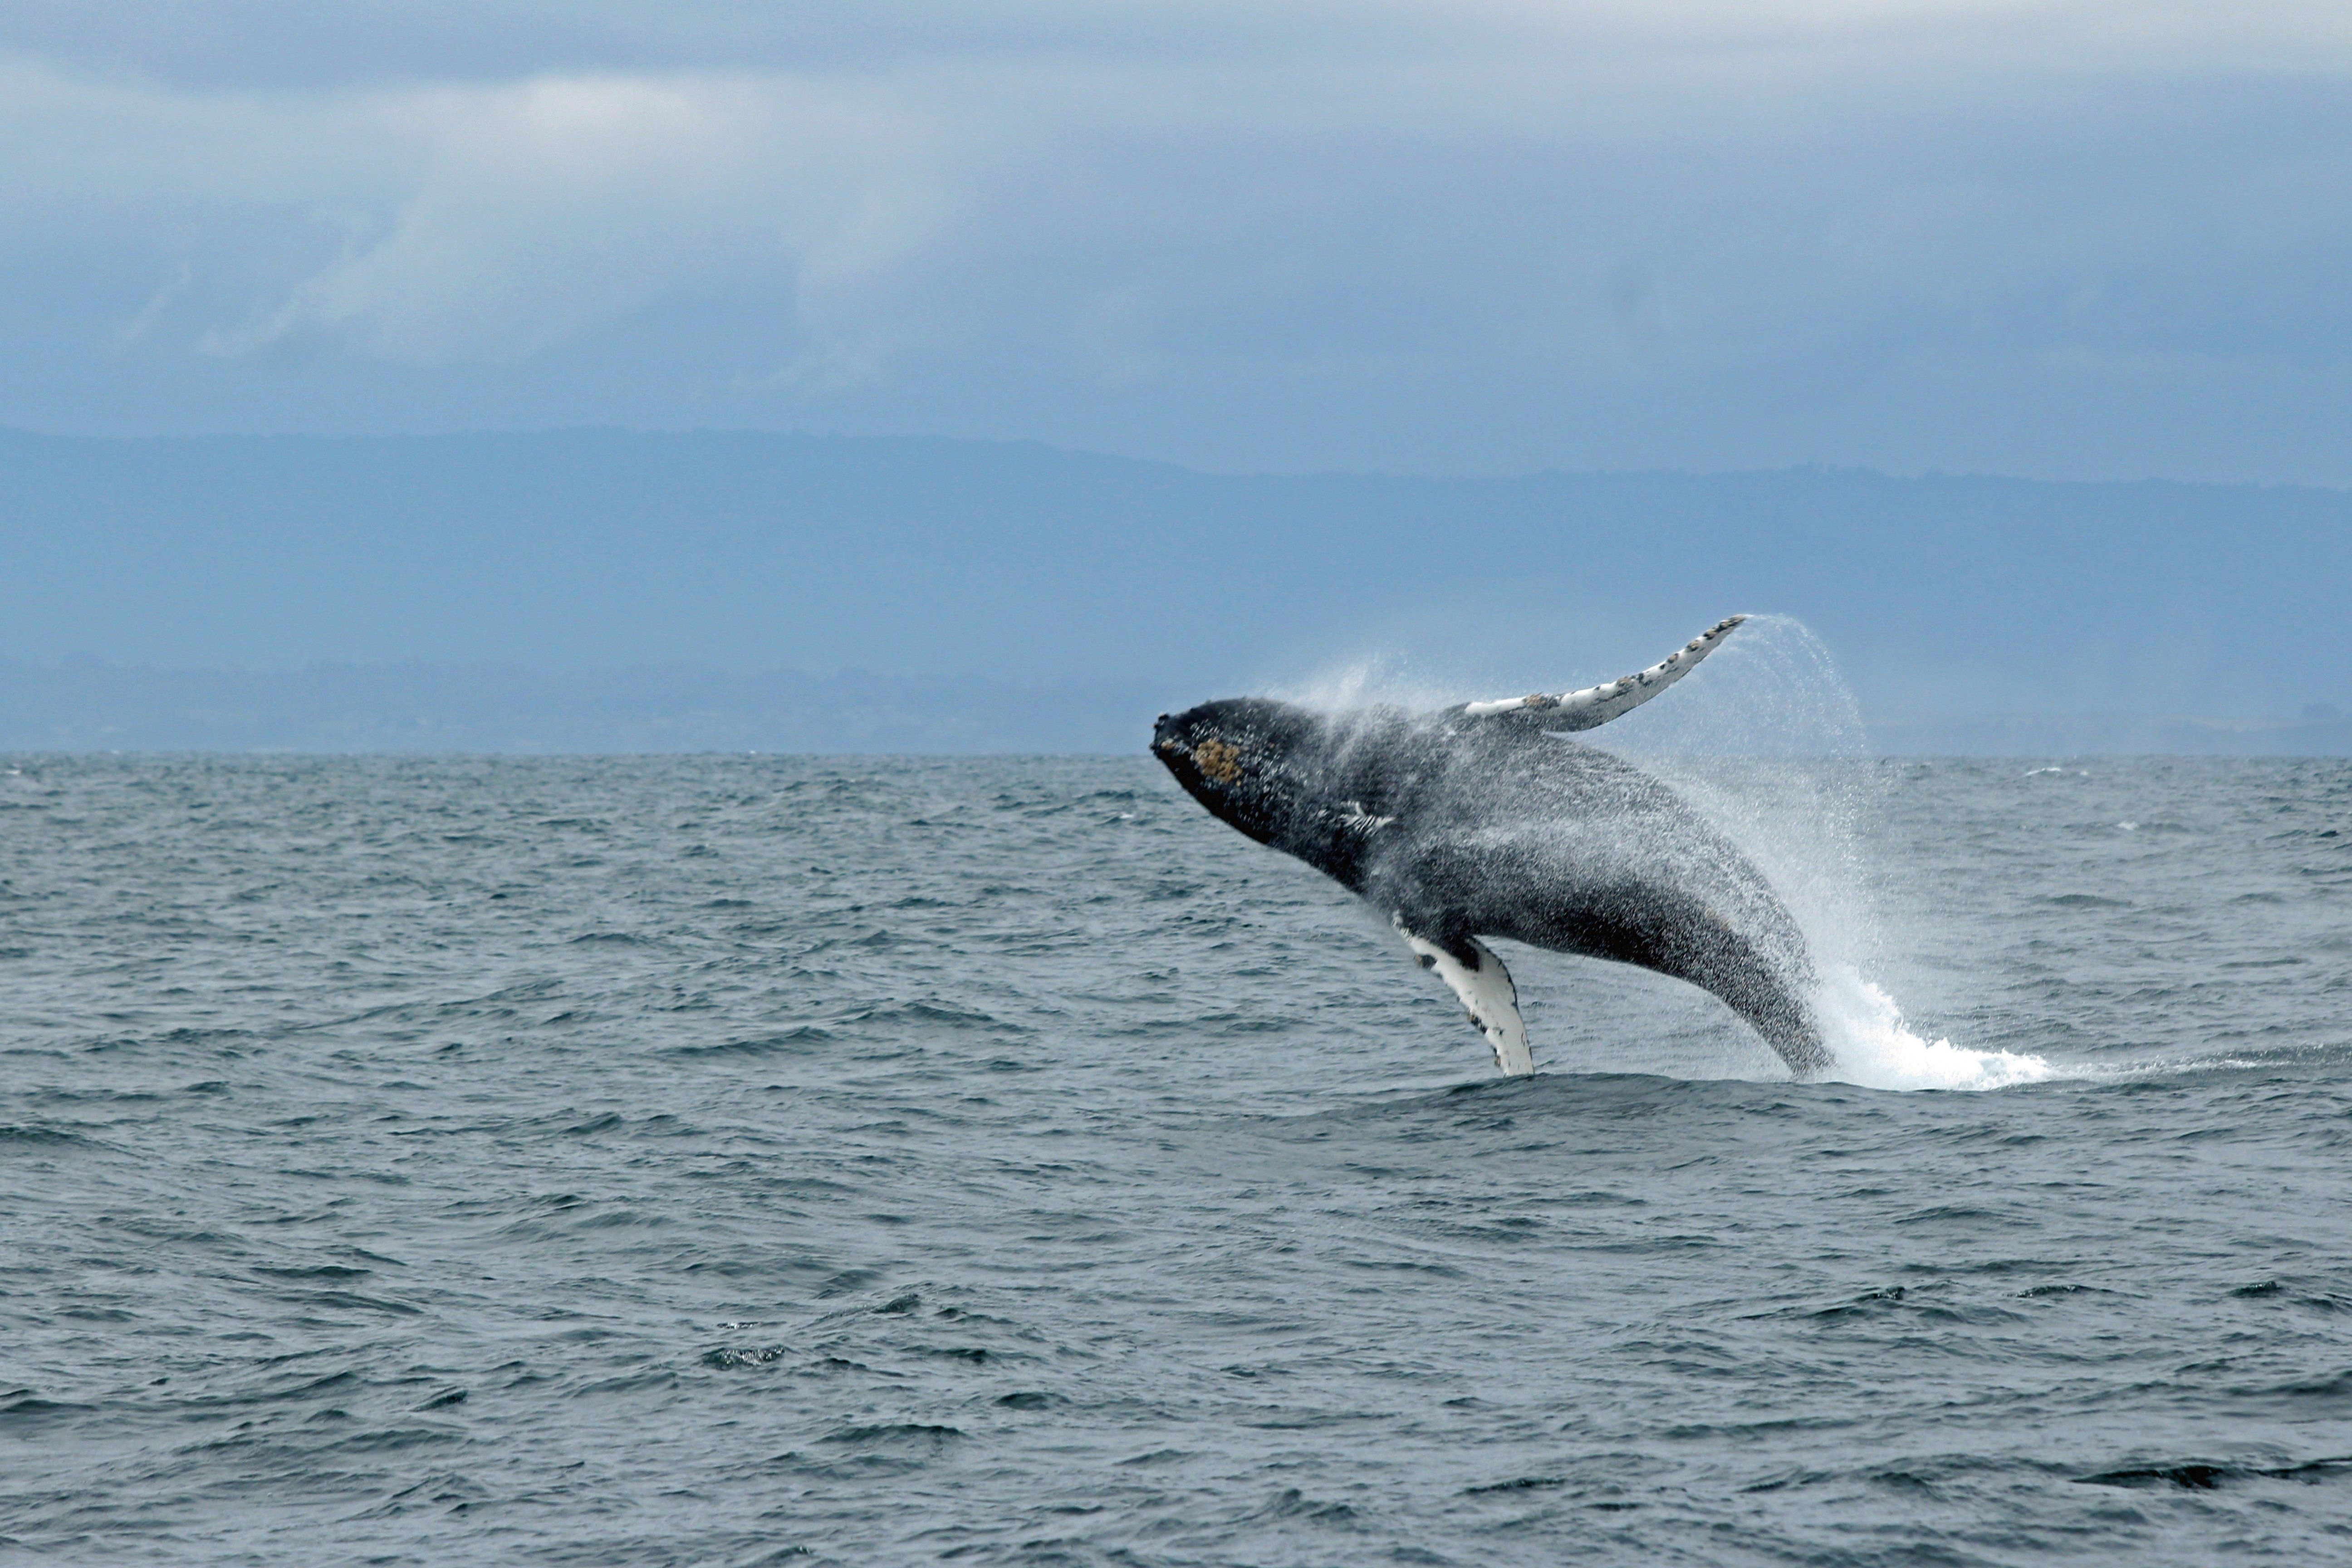 The Best Coastal Perches for Whale Watching in Northern California